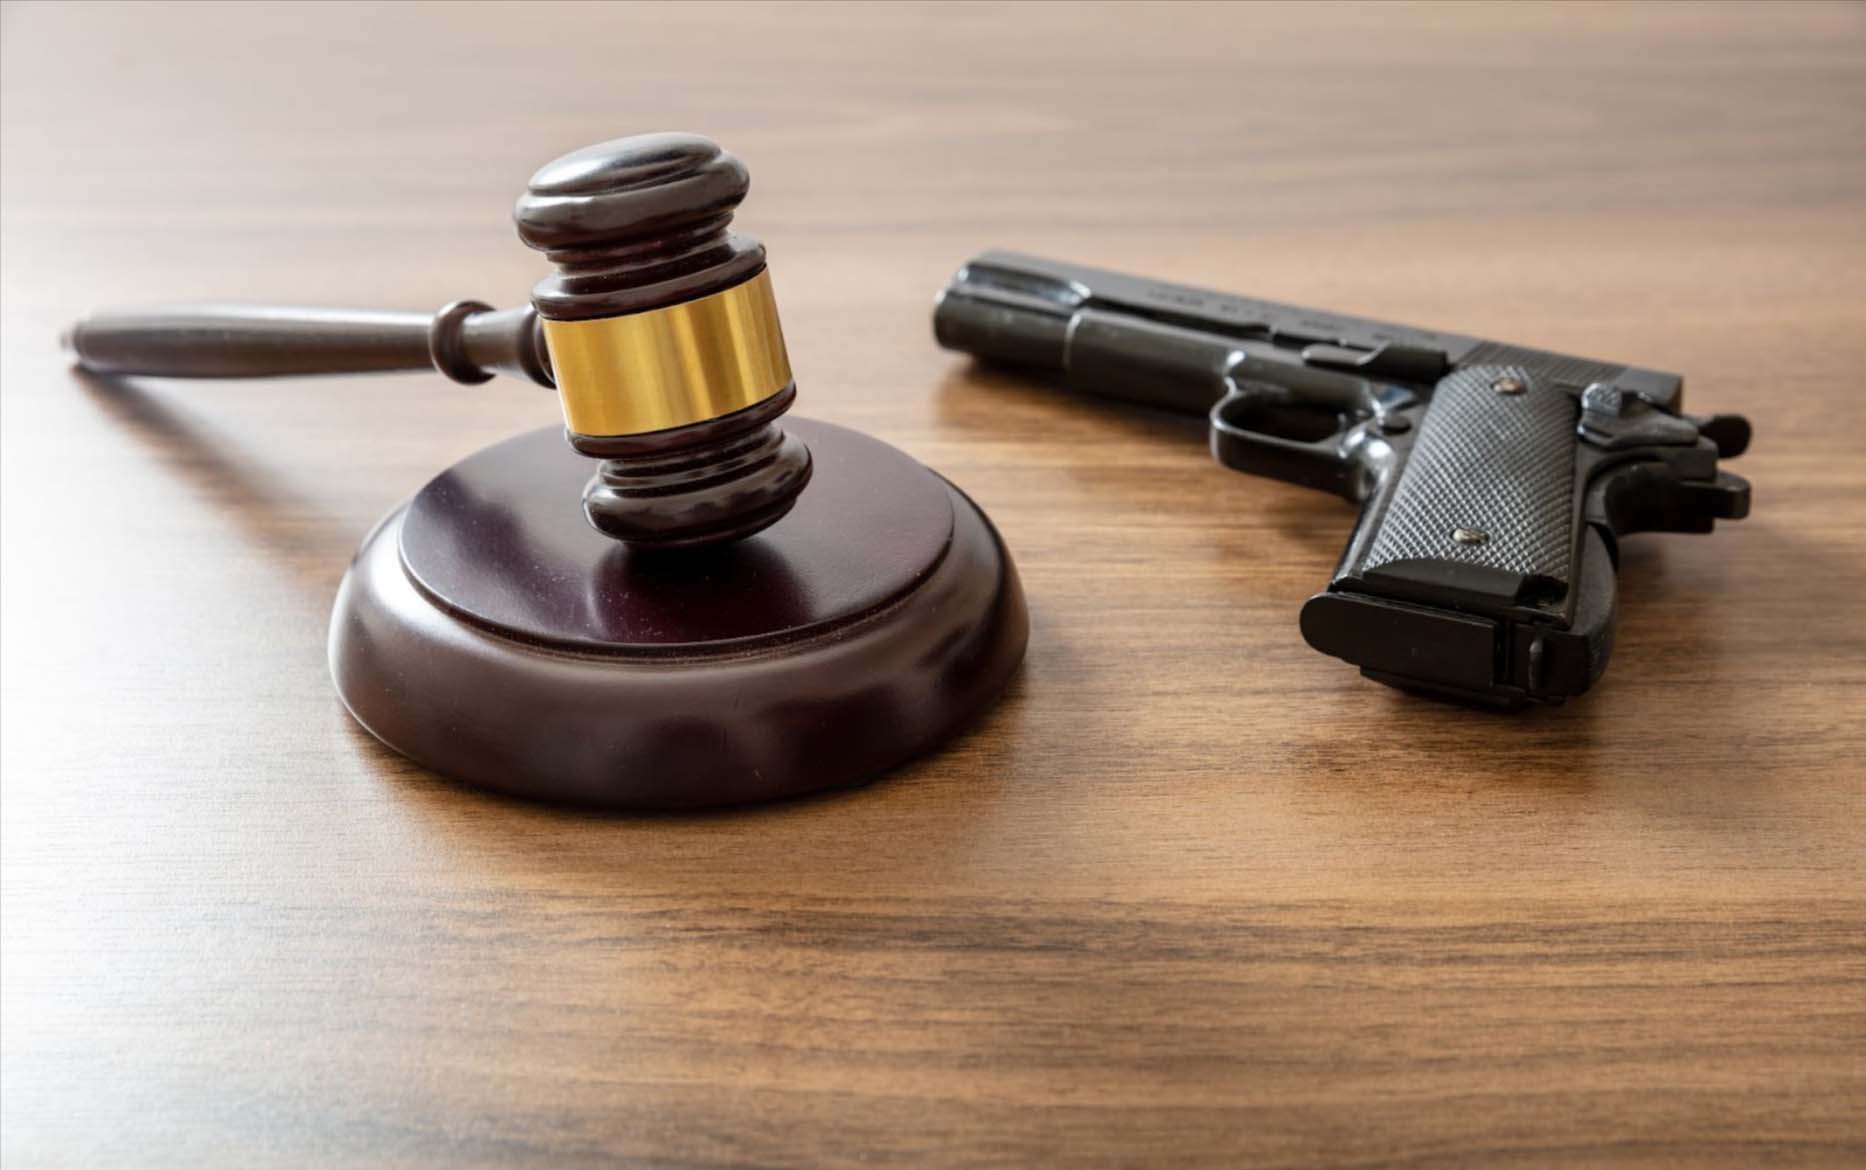 Close-up of a judge's gavel and handgun on a bench, symbolizing crime and punishment in legal firearms cases.